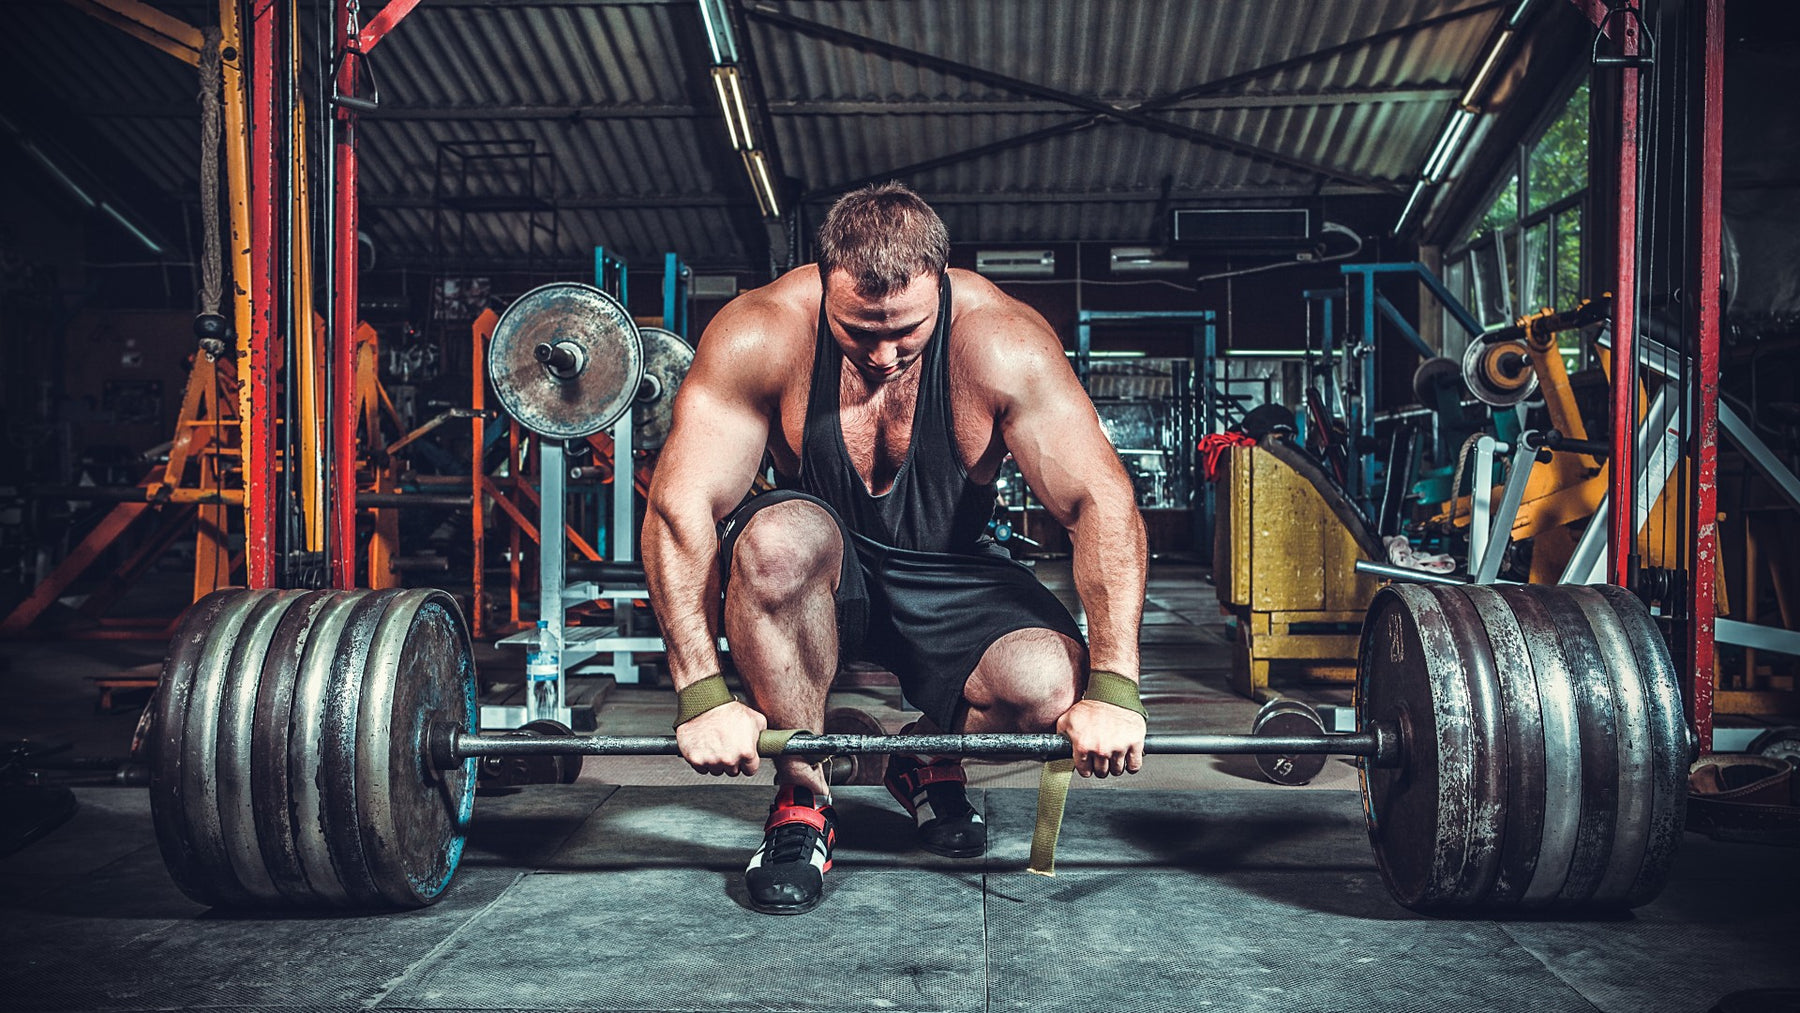 Deadlift Strength - 5 Plateau-Busting Exercises for a Big Pull